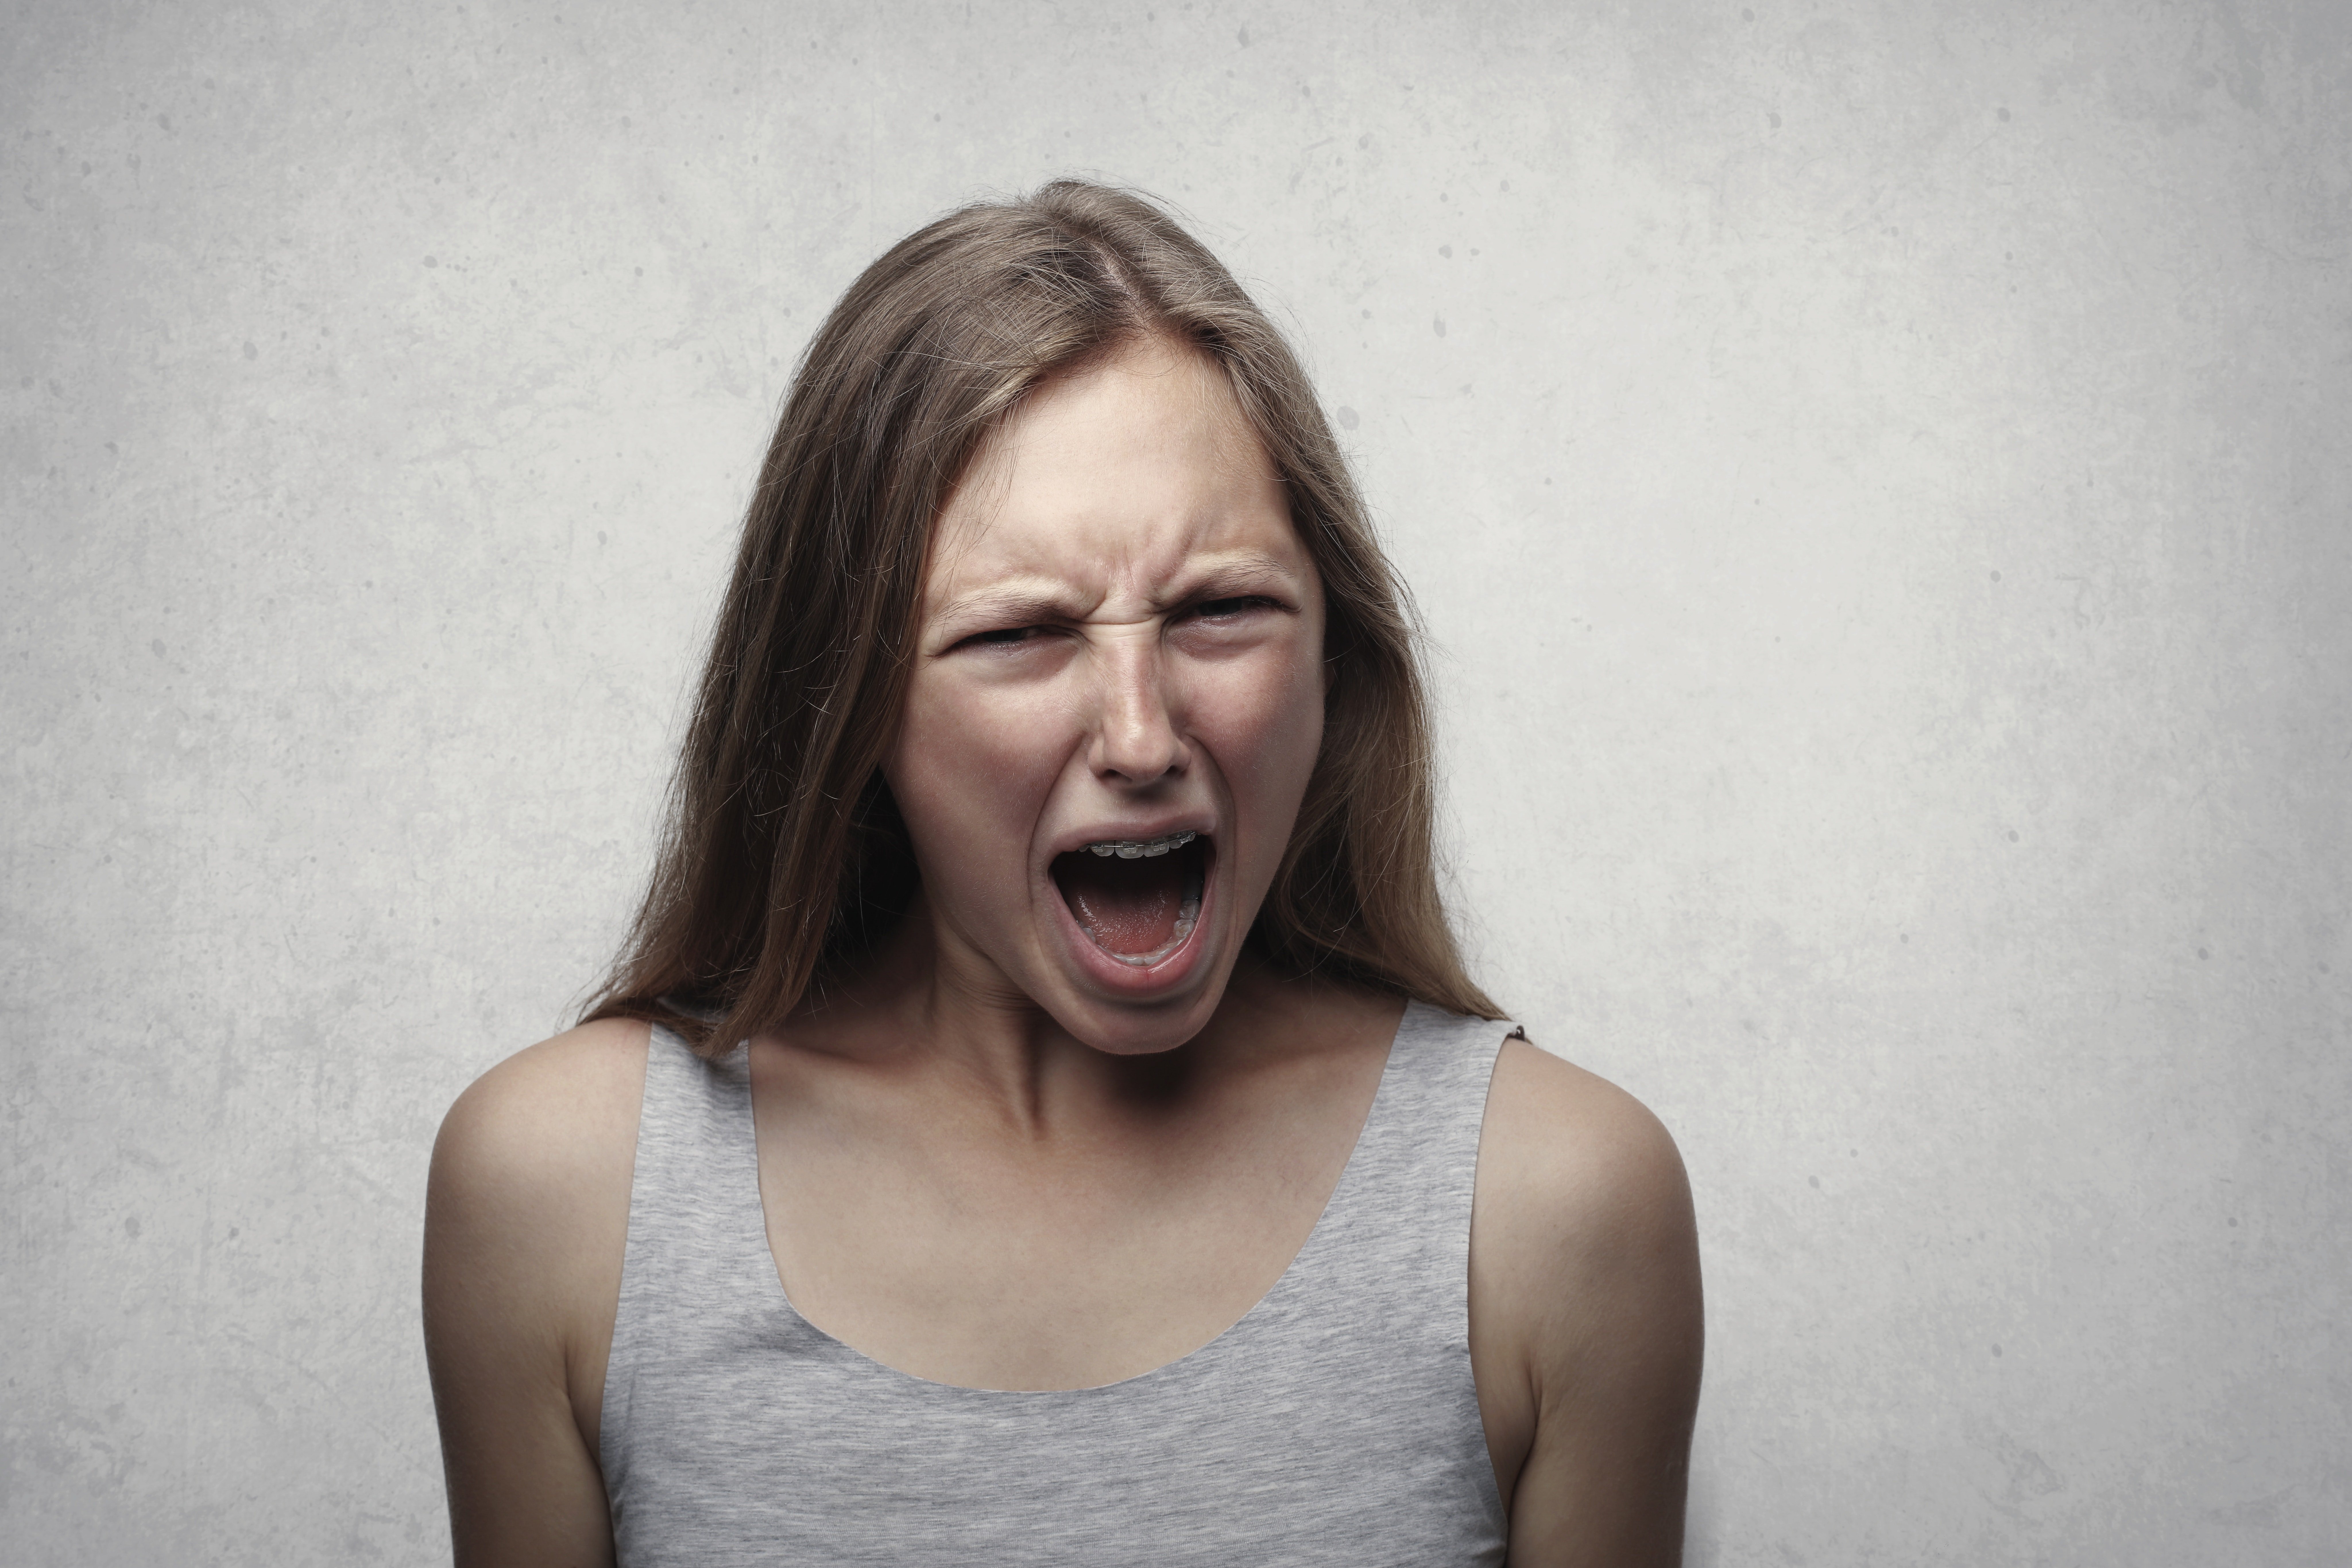 Patricia screamed at the homeless man for scaring her daughter. | Source: Pexels